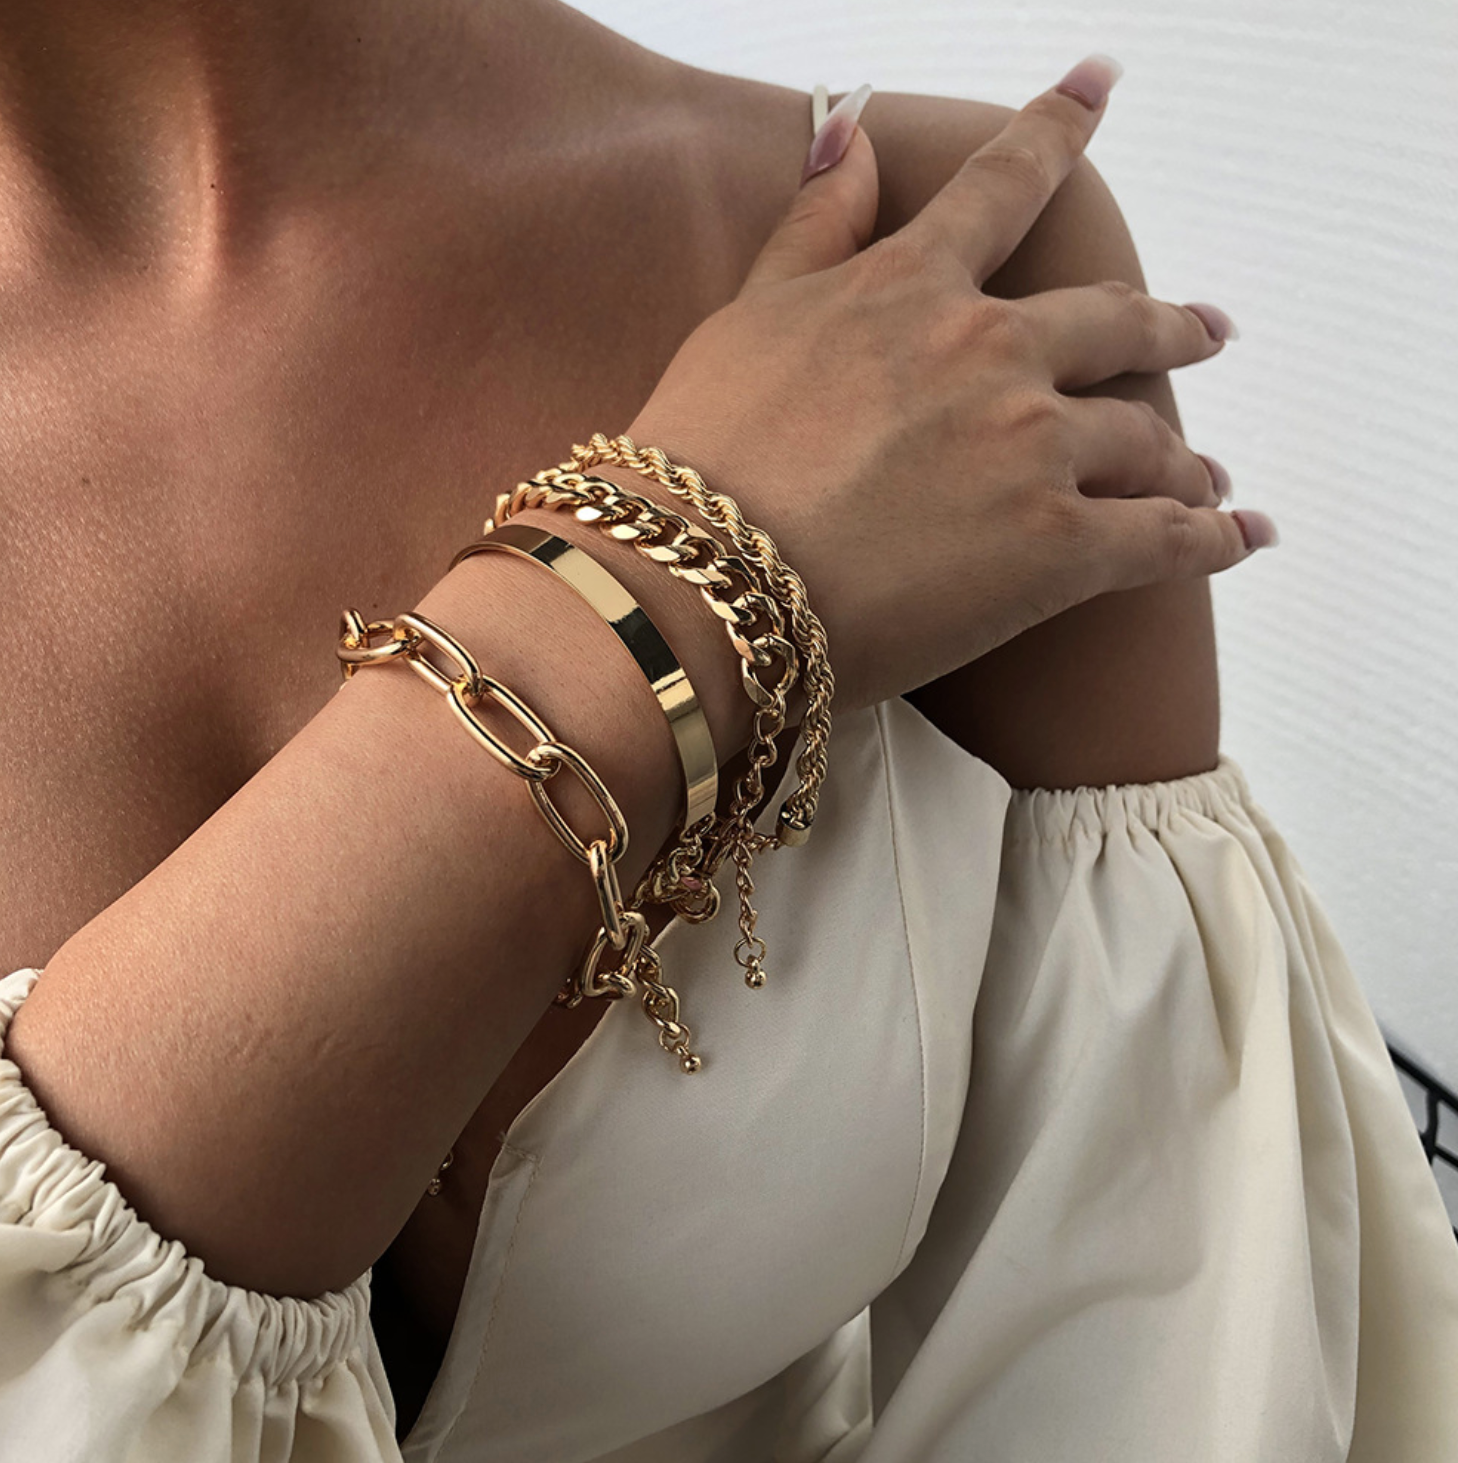 anthropologie twisted gold chain bracelet | Gold bracelet chain, Chain  bracelet, Bracelet shops